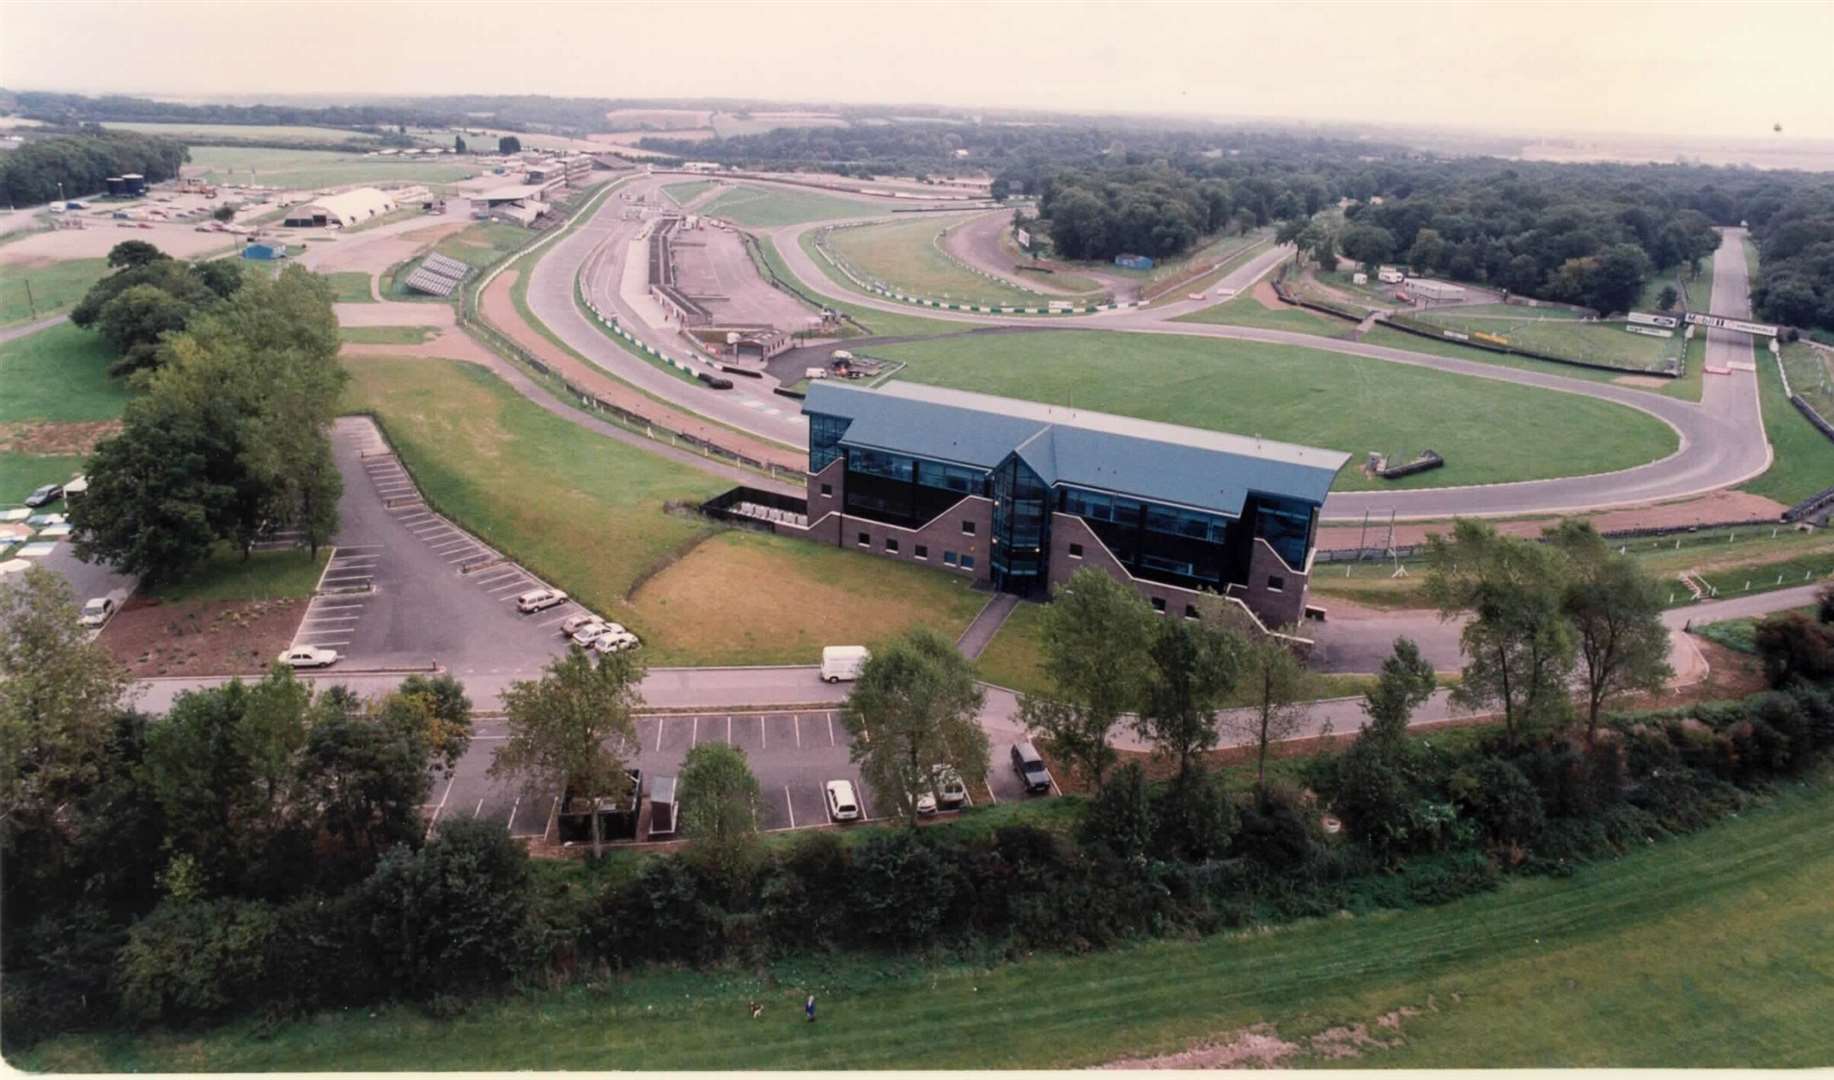 Brands Hatch in 1992. Looking across the Indy circuit from near to the site entrance.